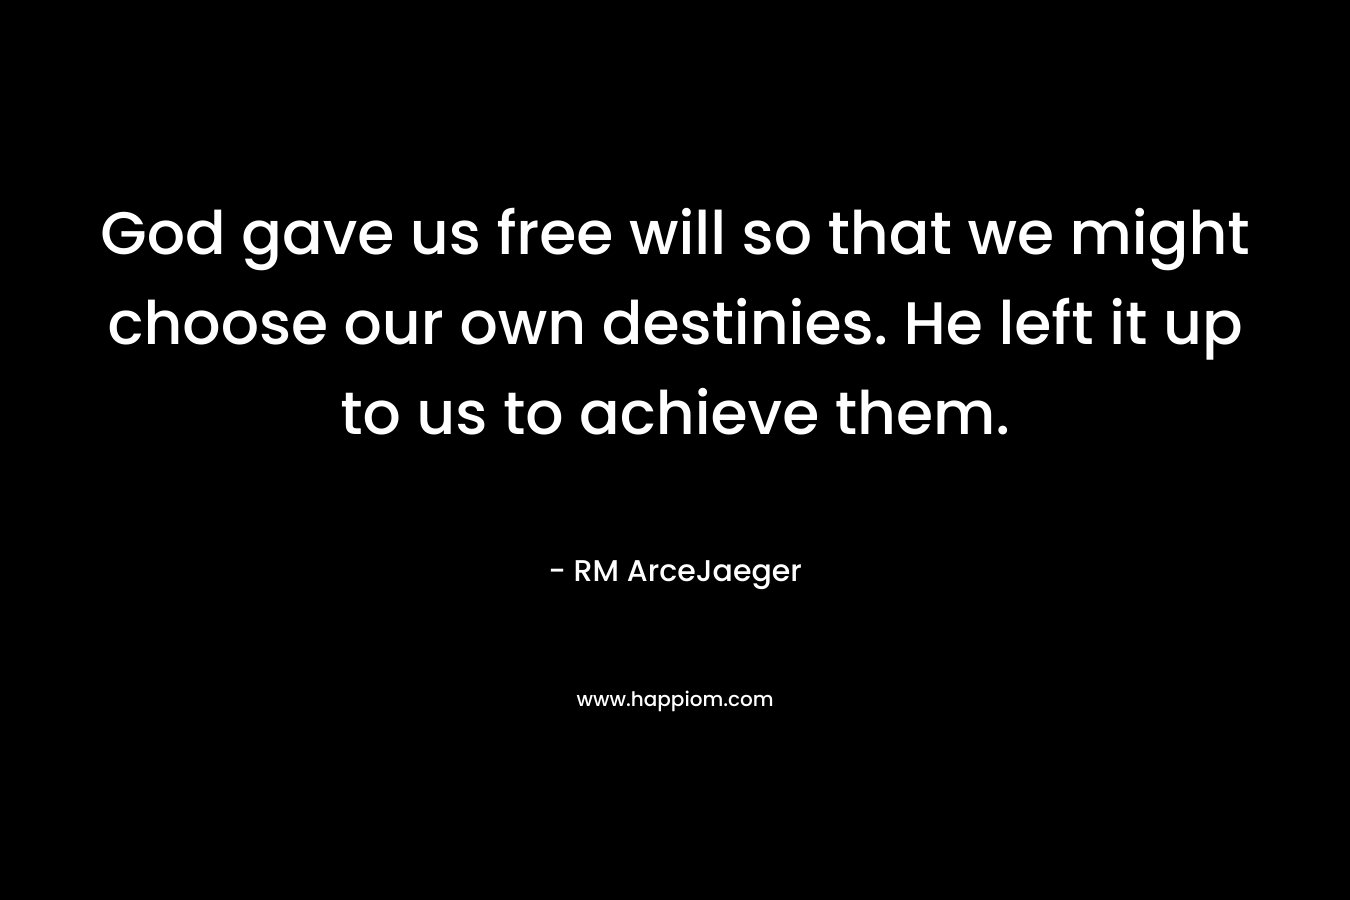 God gave us free will so that we might choose our own destinies. He left it up to us to achieve them. – RM ArceJaeger